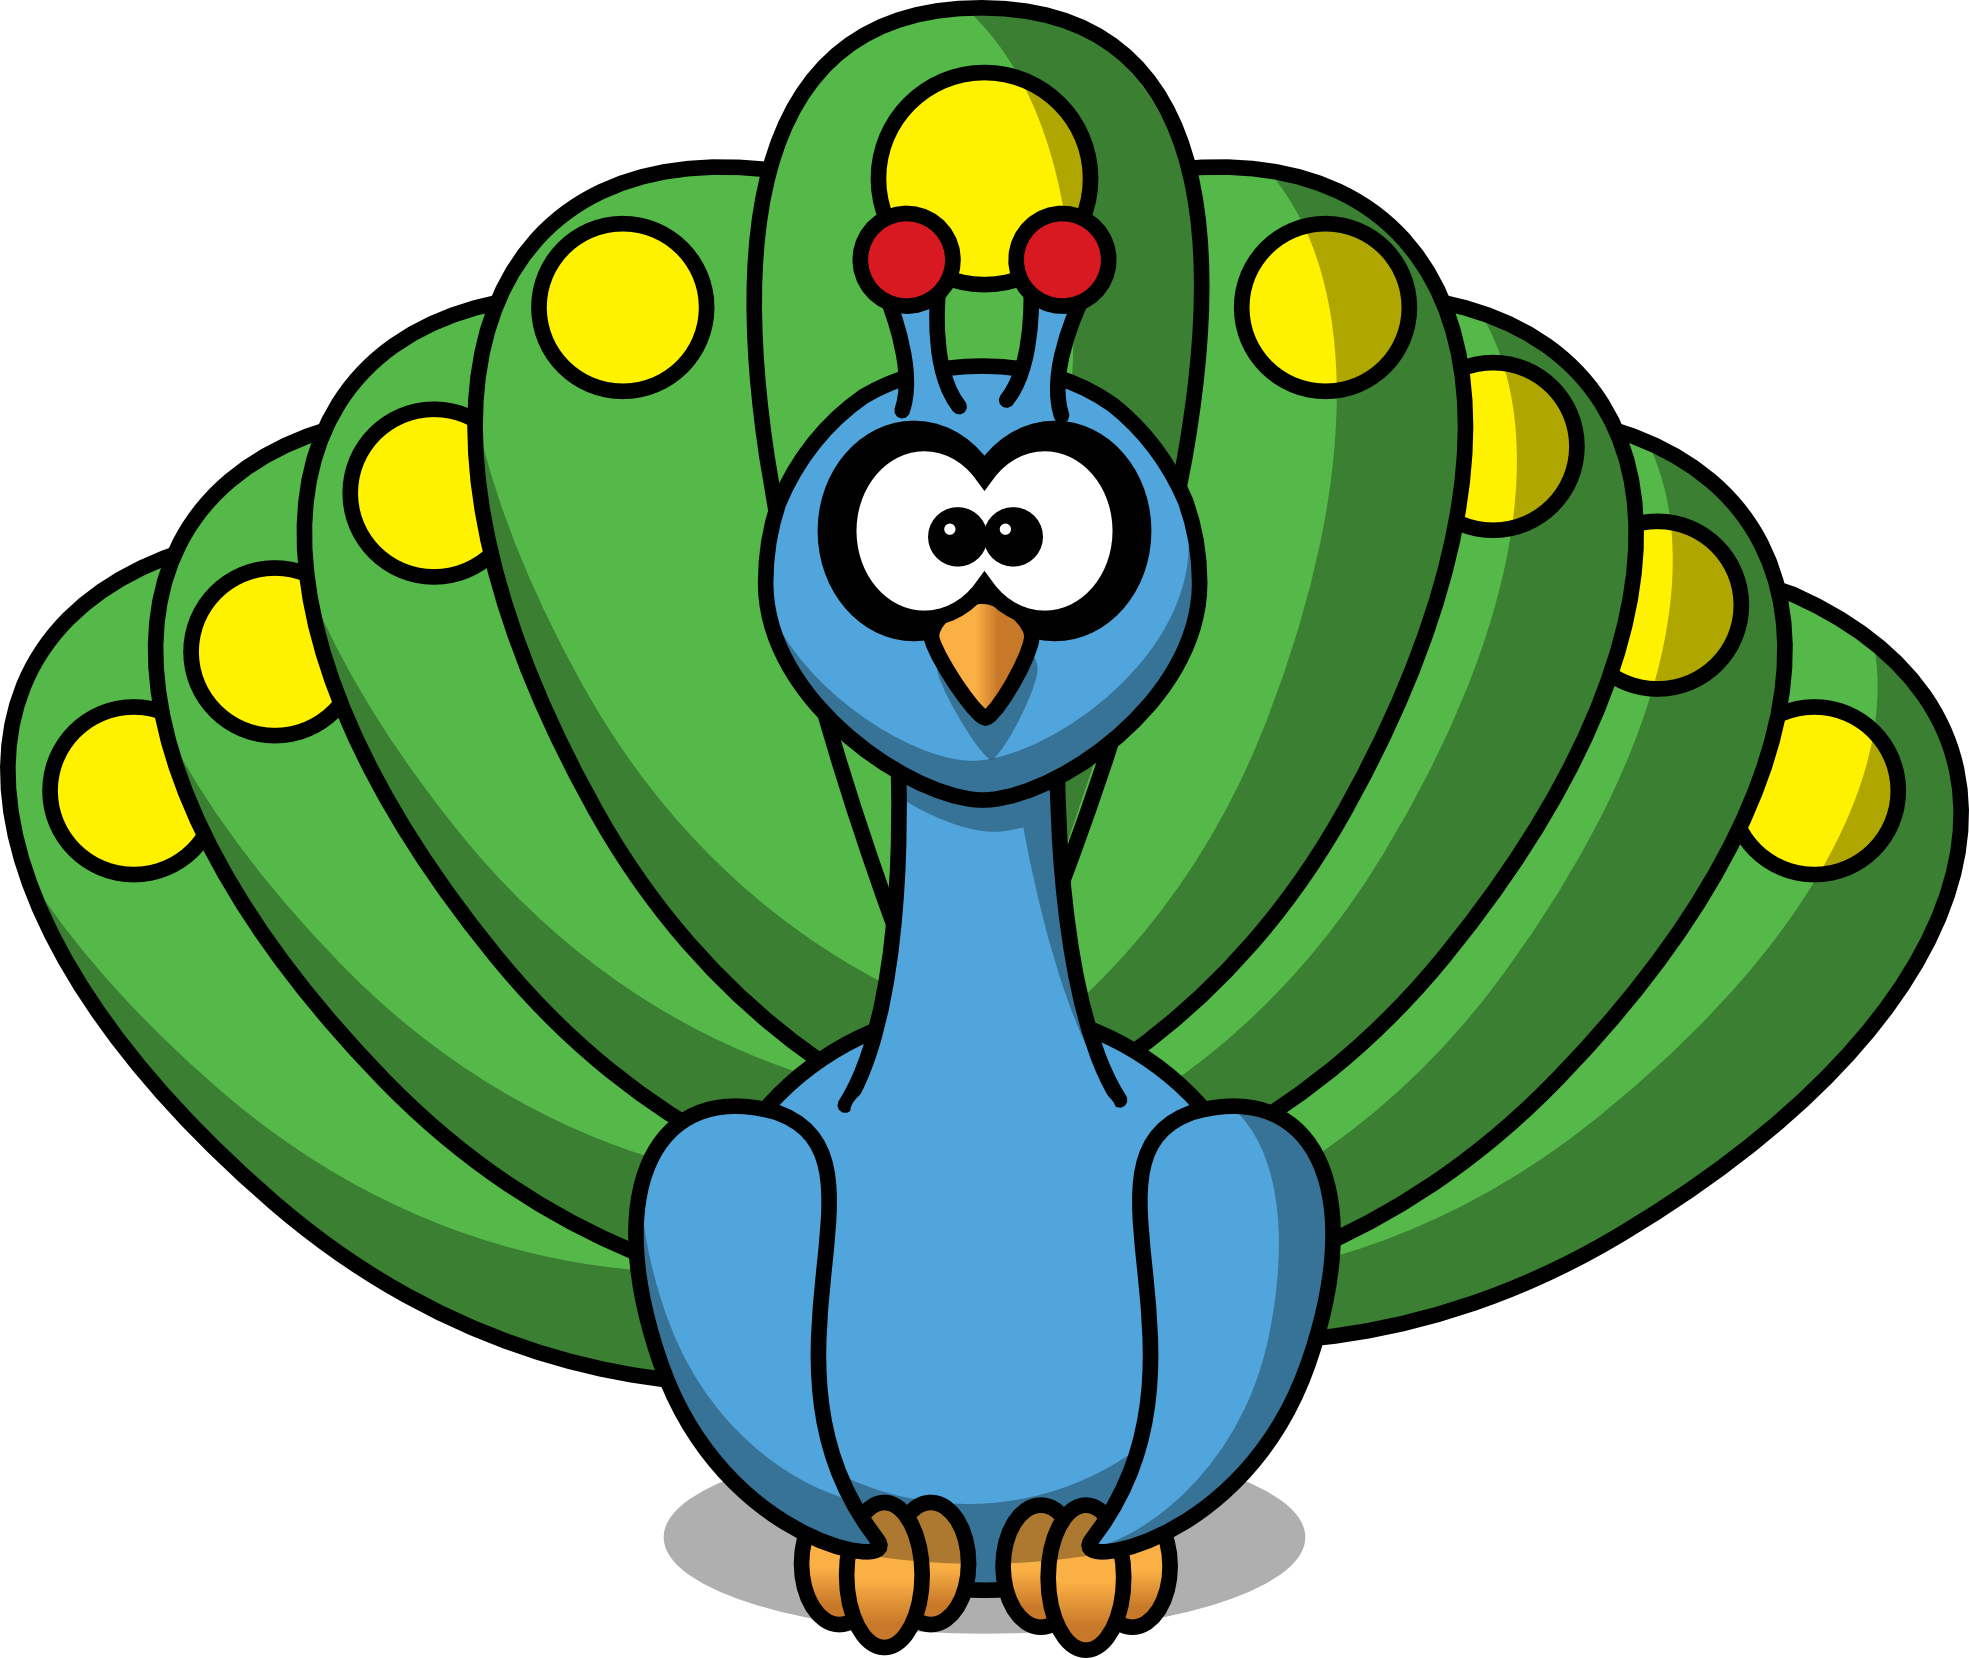 Peacock clipart free clipart images 4